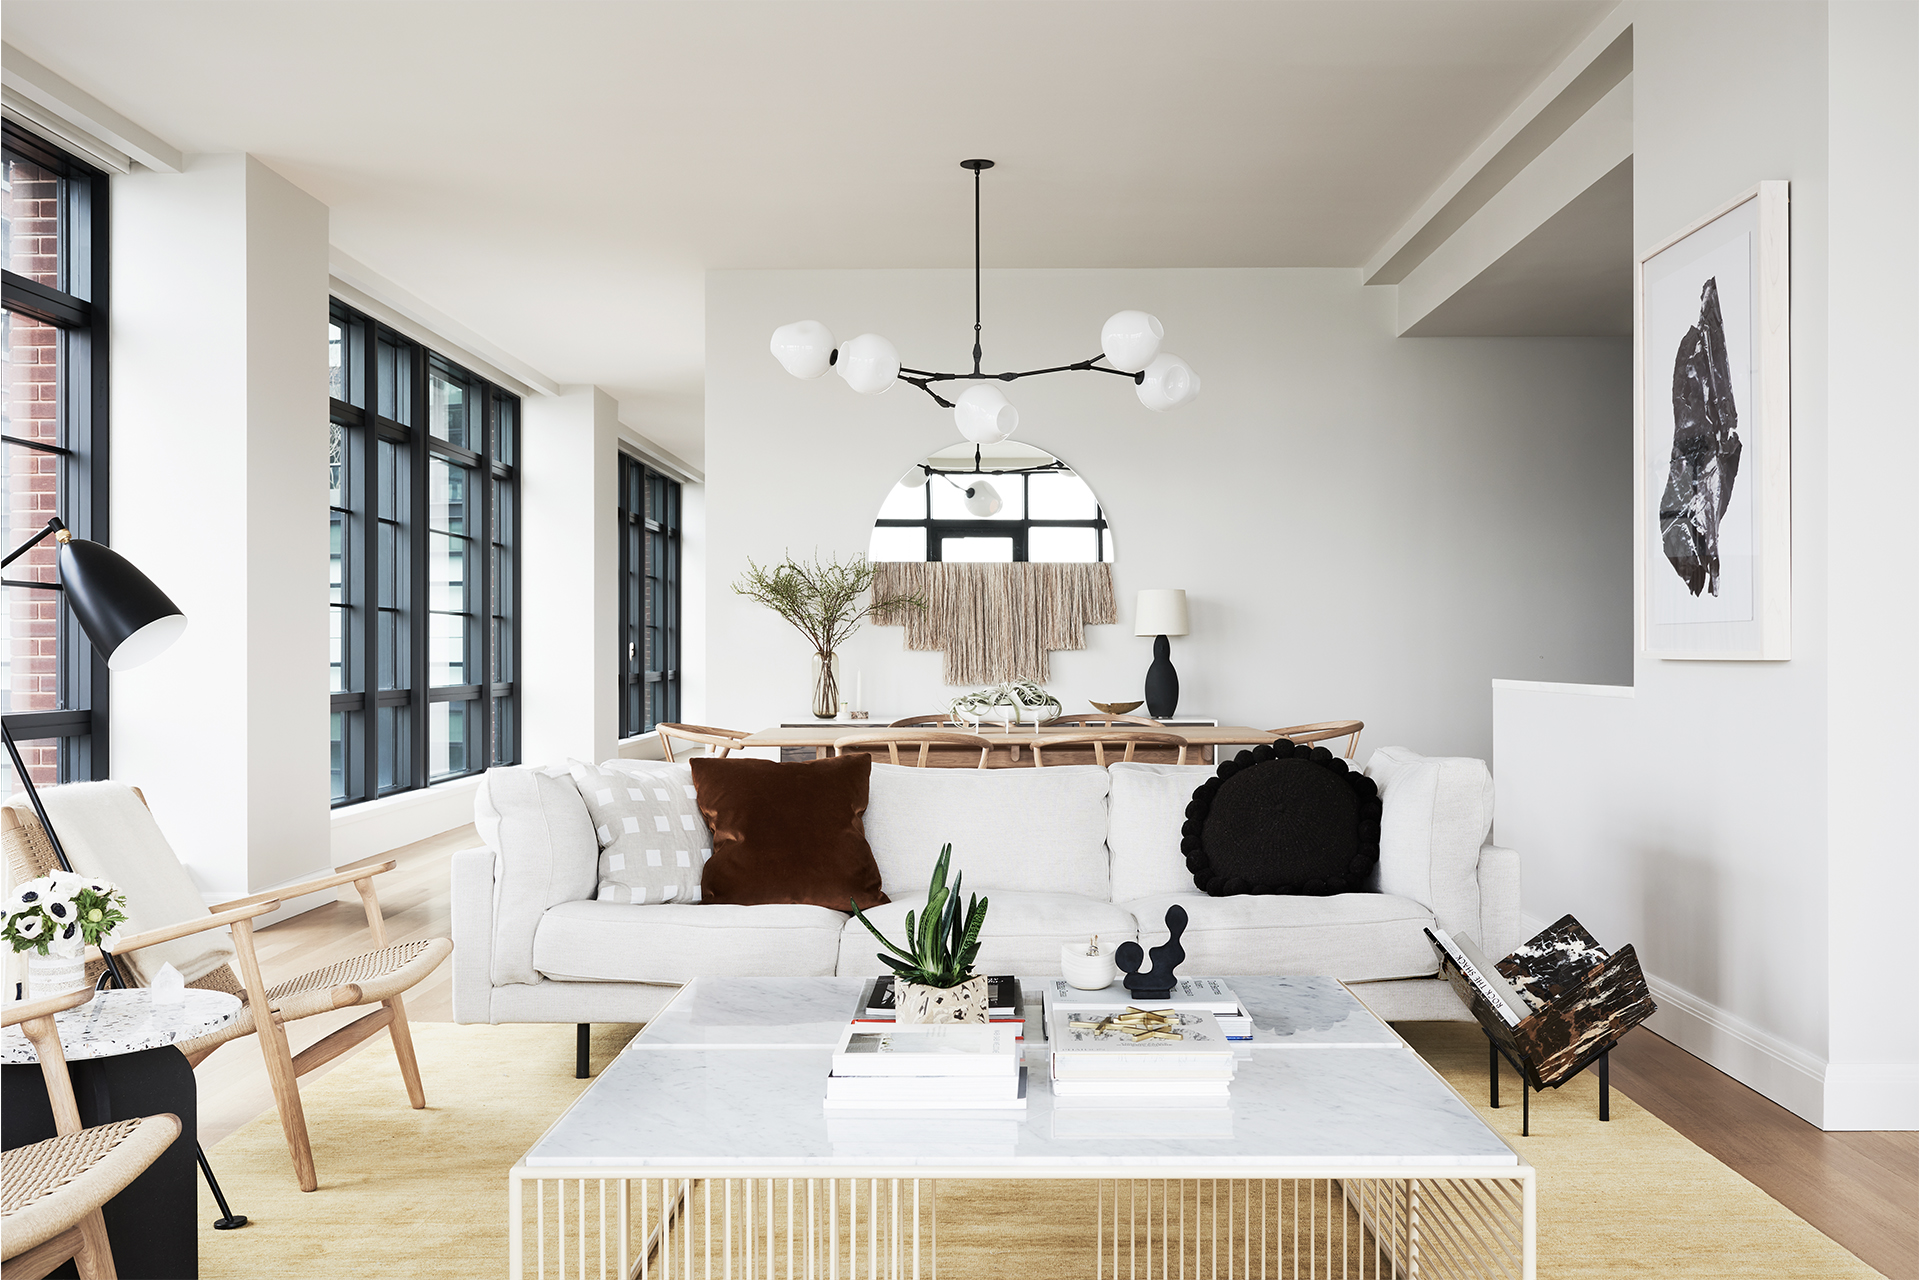 pix7 Scandinavian living room ideas that look awesome